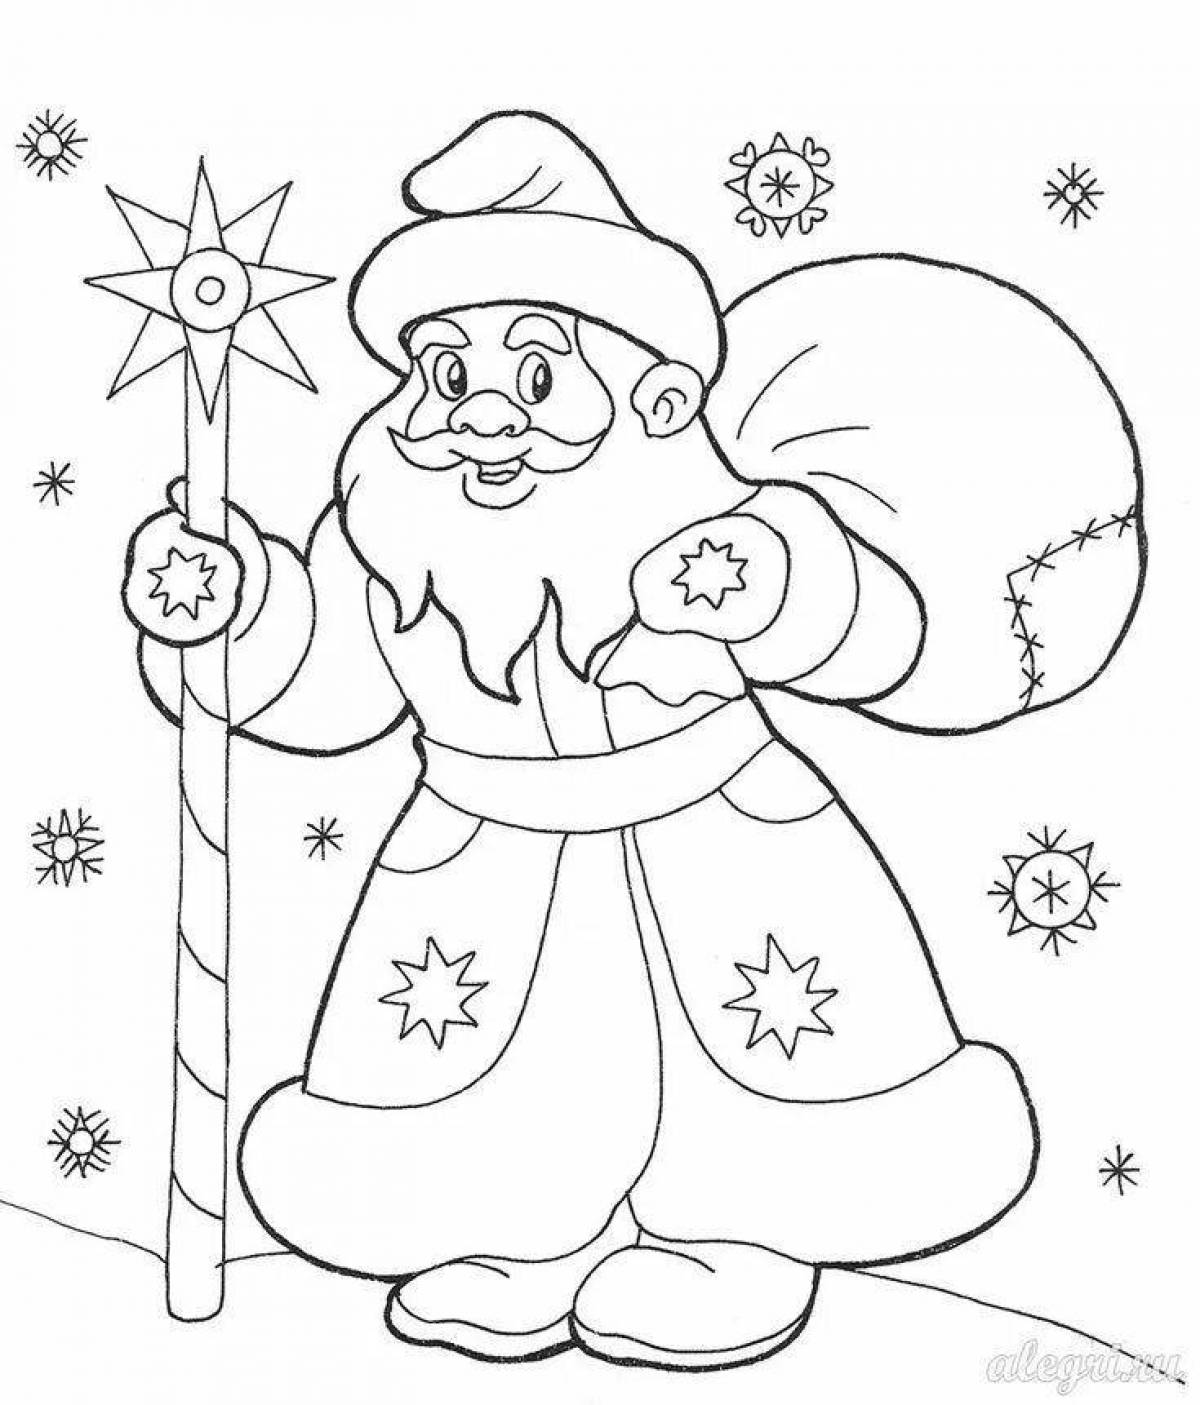 Incredible Christmas coloring book for kids 2-3 years old